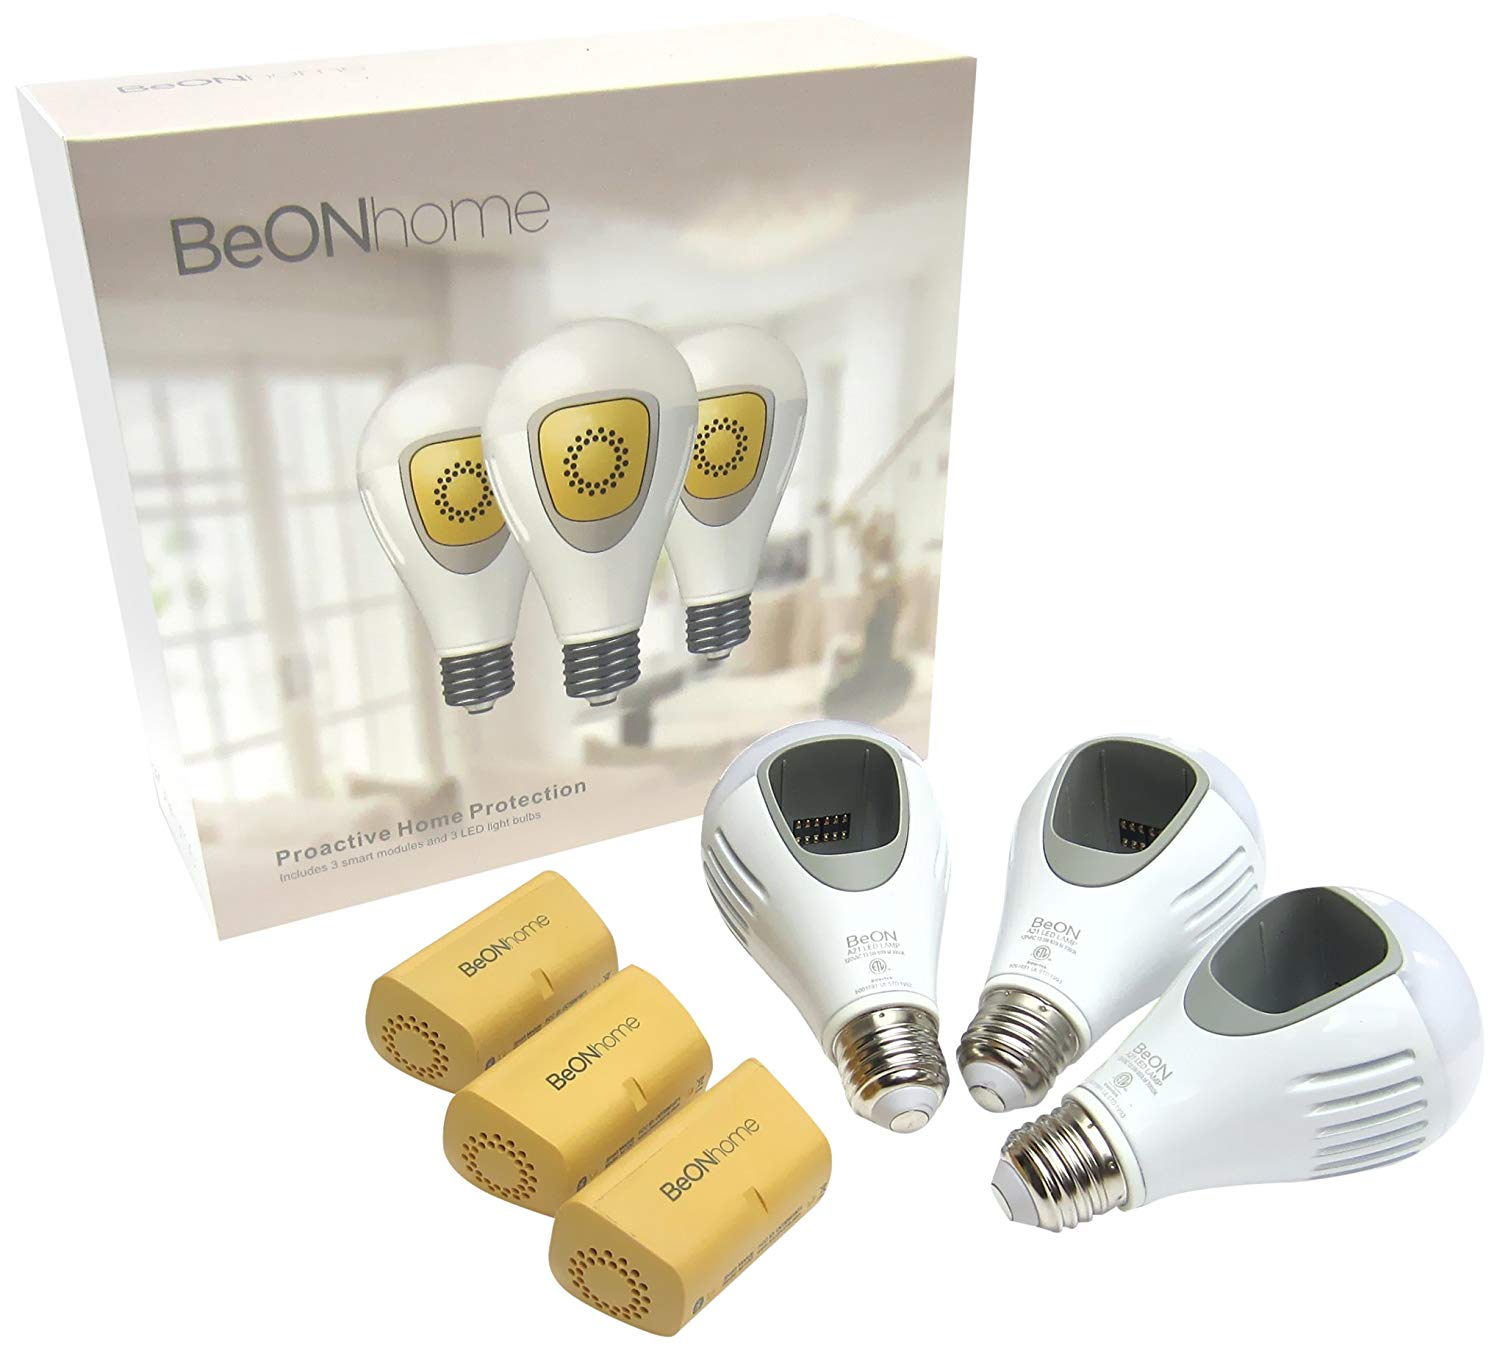 BeON Home Protection System, Set of Three Bulbs 1